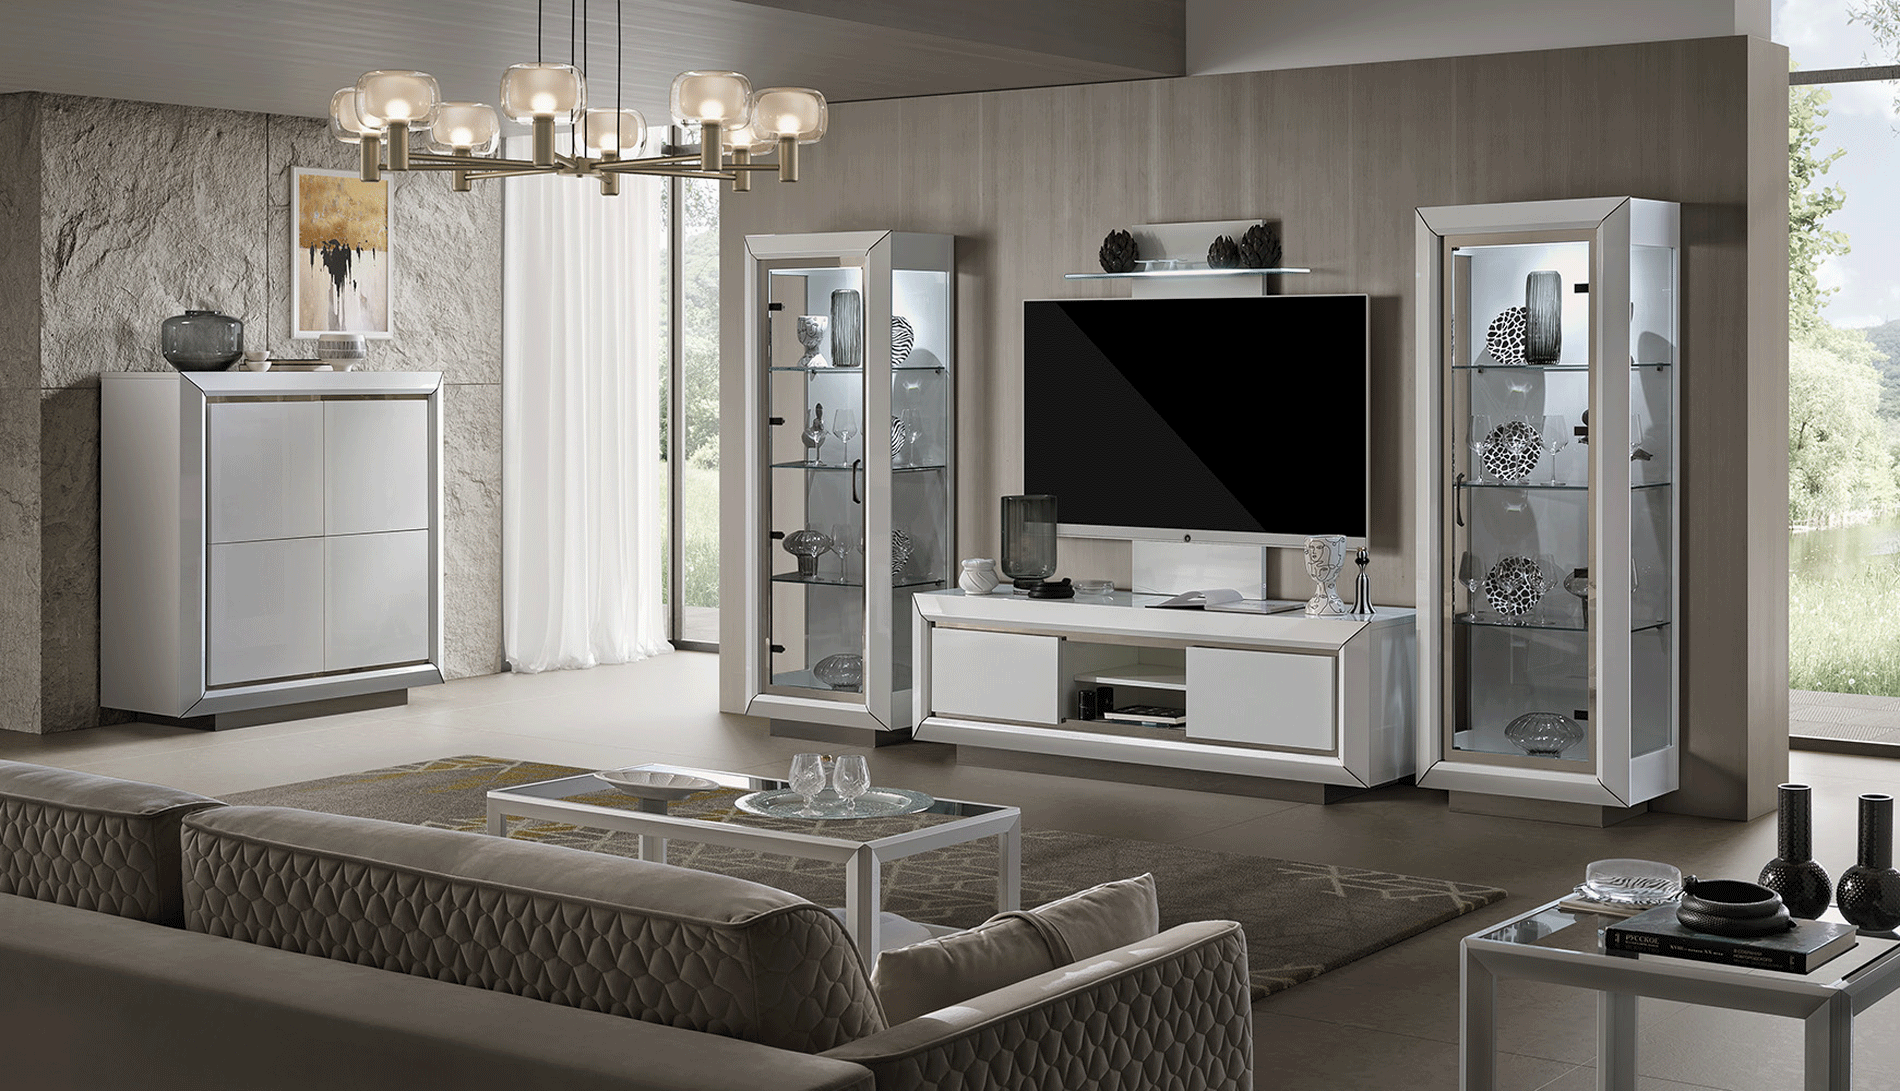 Brands MSC Modern Wall Unit, Italy Elite WHITE Entertainment center Additional items